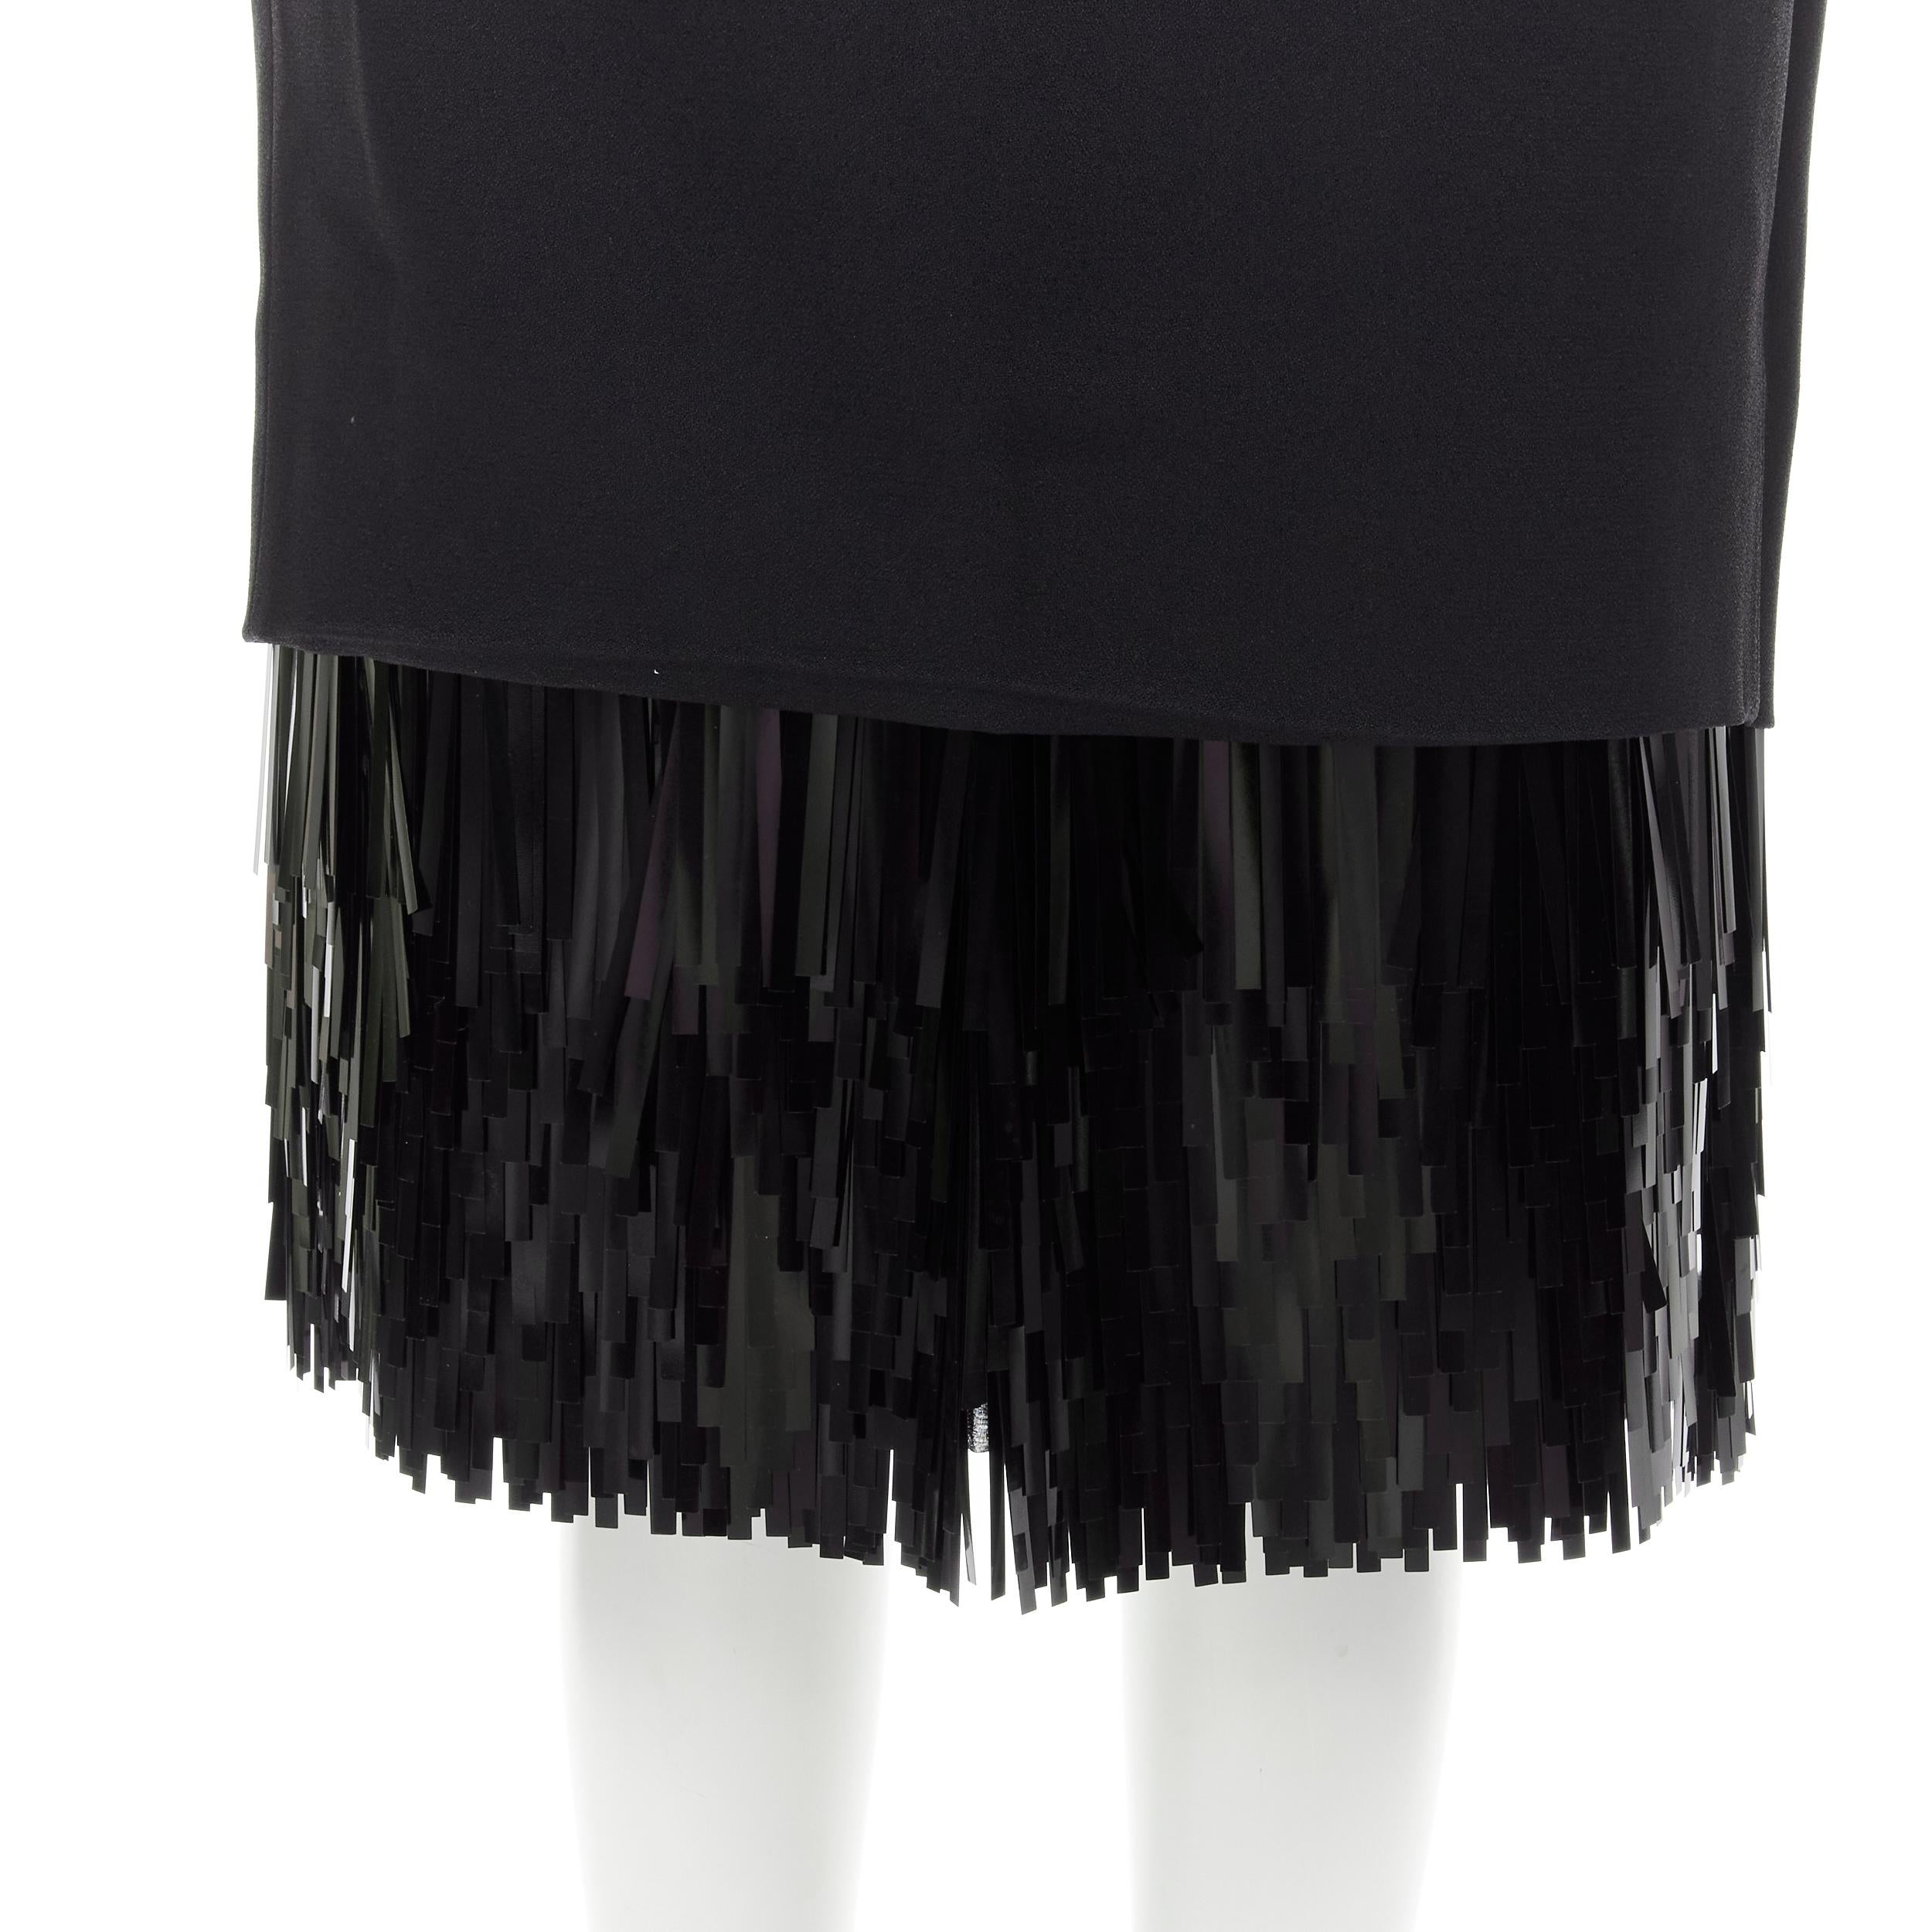 JASON WU black fringe sequins hem cocktail skirt US0 XS 
Reference: KEDG/A00104 
Brand: Jason Wu 
Material: Acetate 
Color: Black 
Pattern: Solid 
Closure: Zip 
Extra Detail: Sequins fringe hem. 
Made in: USA 

CONDITION: 
Condition: Excellent, this